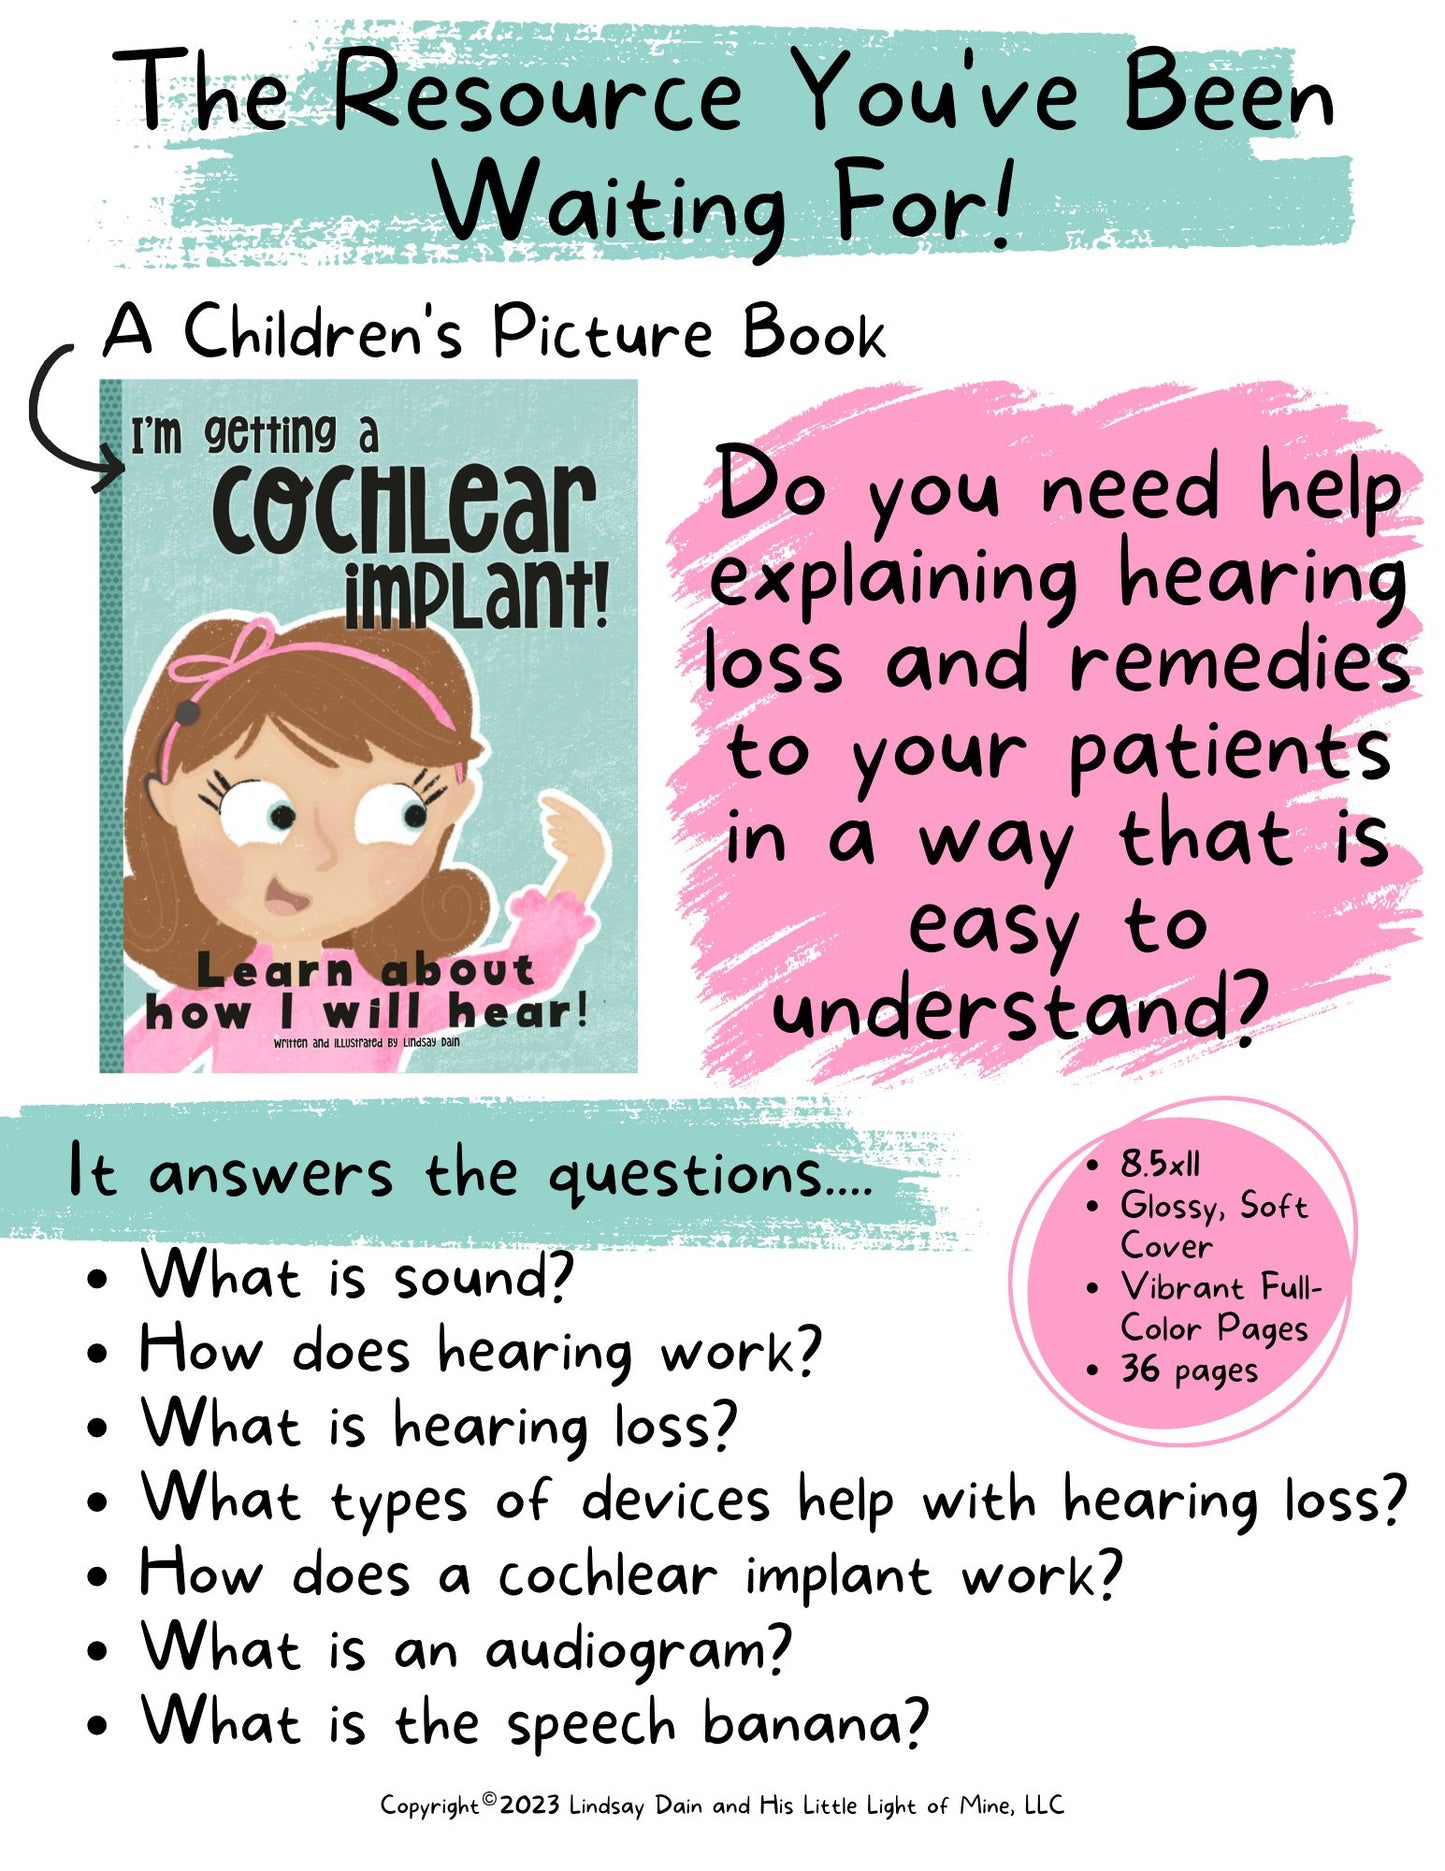 Wholesale ad of a self-published cochlear implant children’s picture book about hearing and hearing loss created through Amazon Kindle Direct Publishing A New Resource